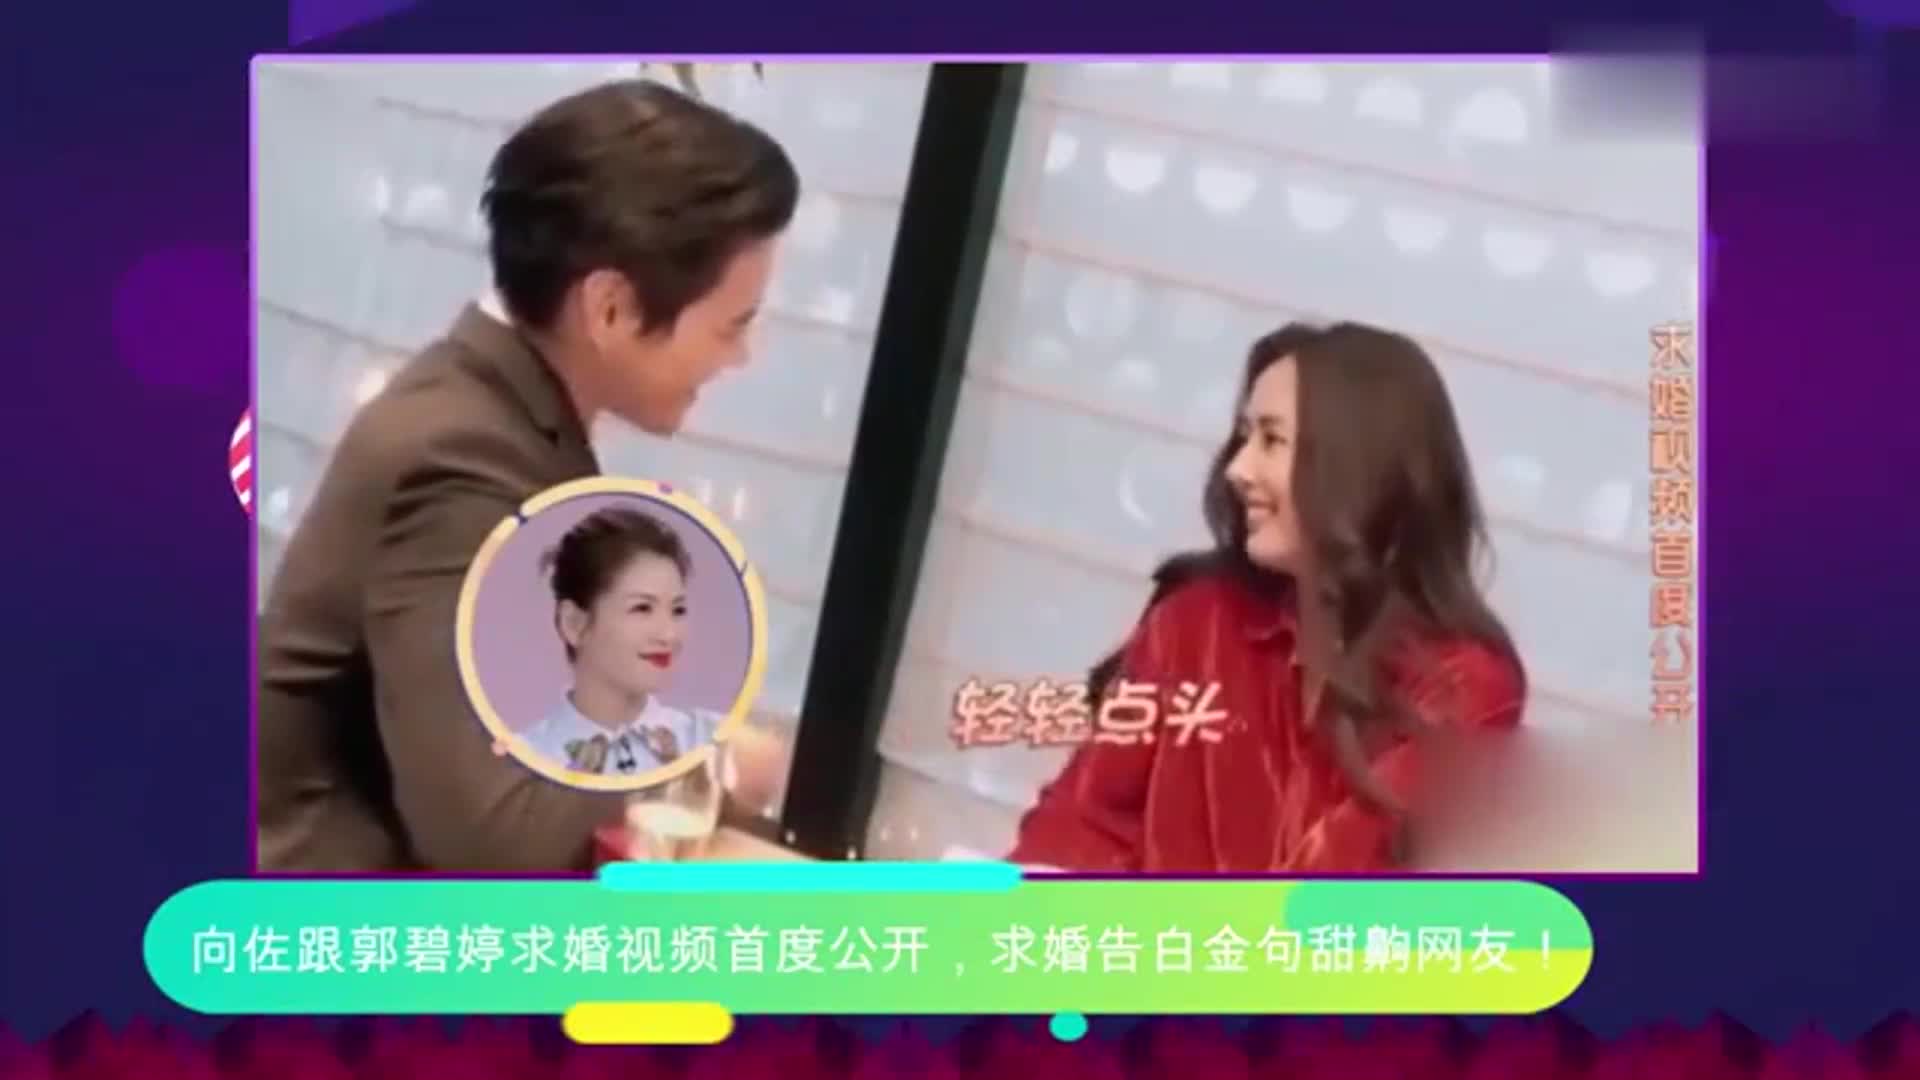 For the first time, the video of Suggesting Marriage to Zuo and Guo Biting was made public.